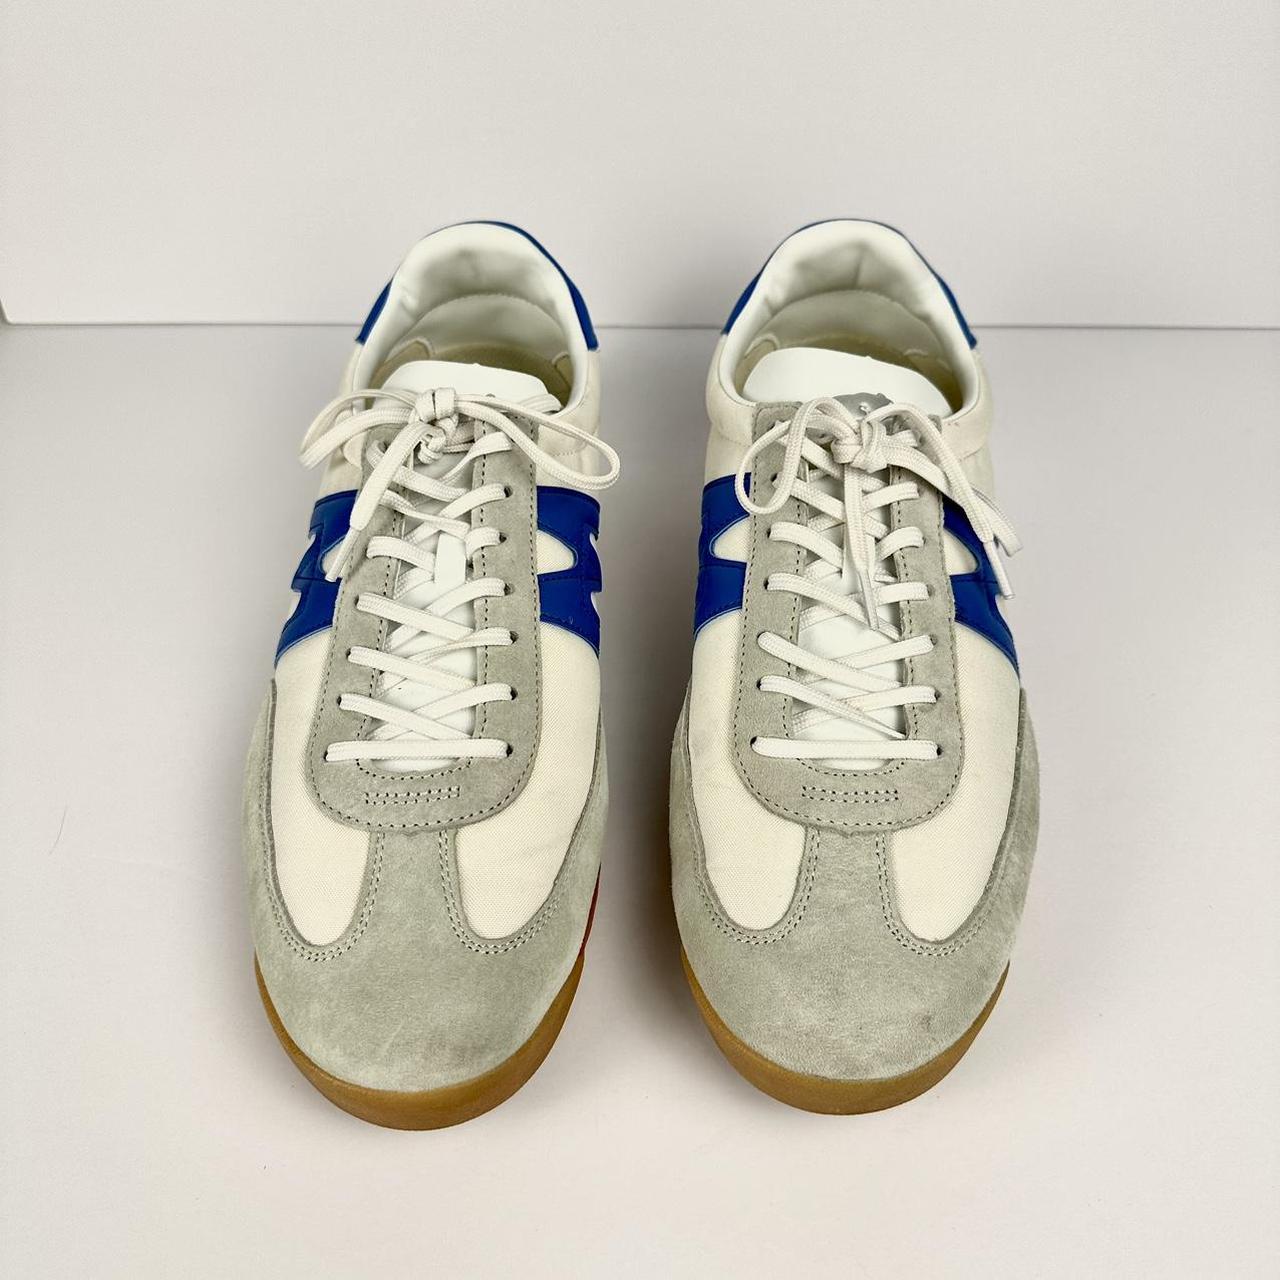 Karhu Men's White and Blue Trainers (6)